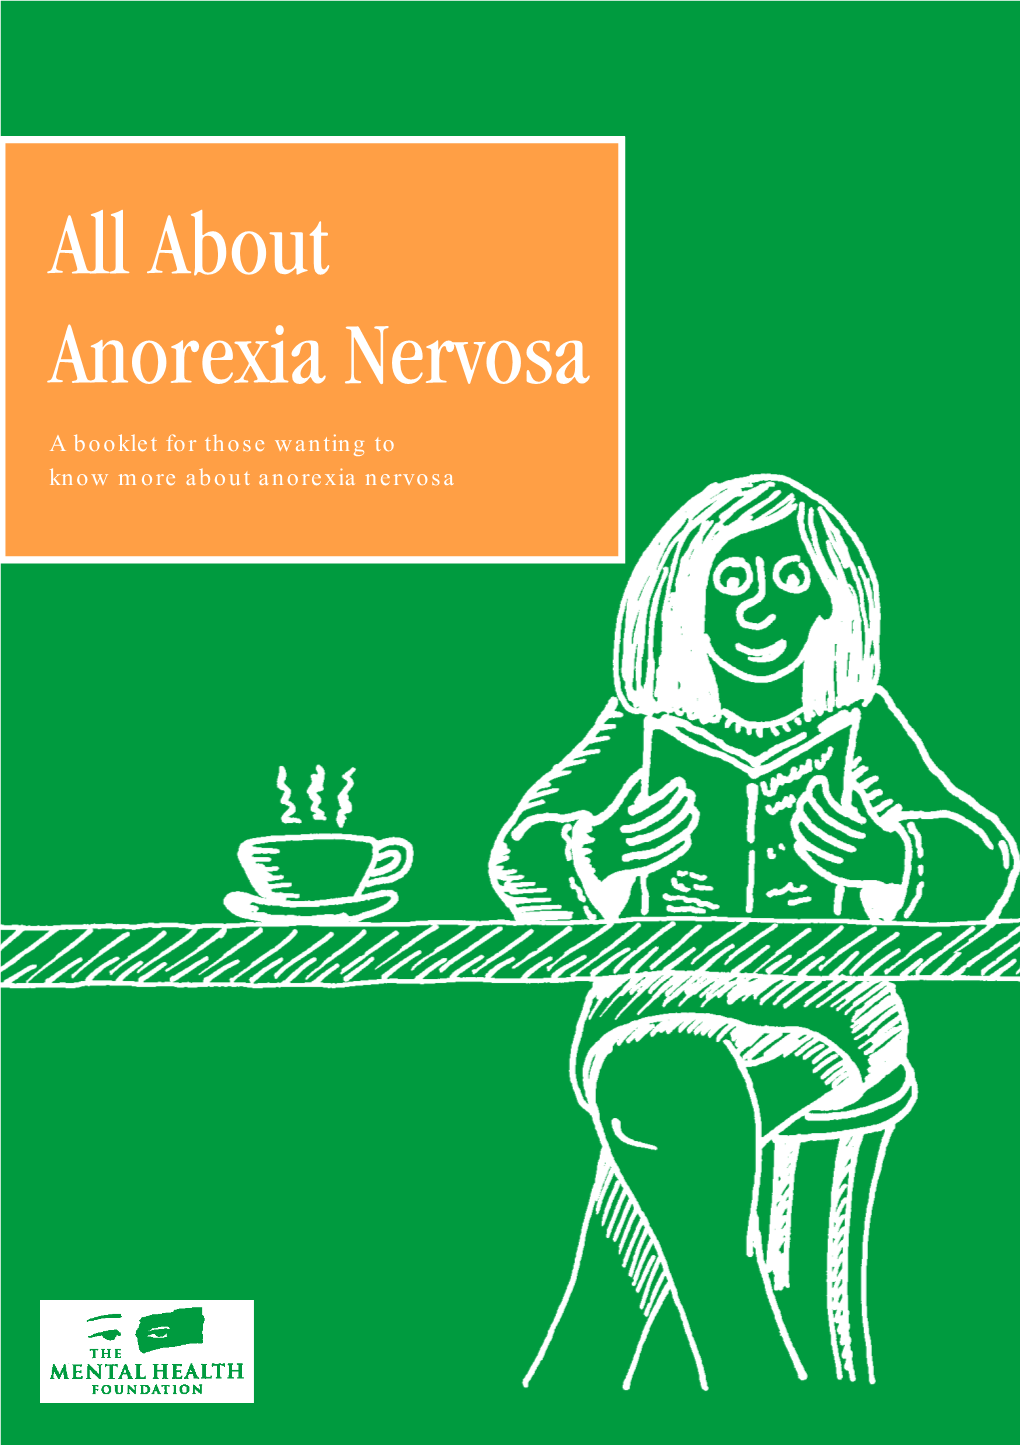 About Anorexia Nervosa